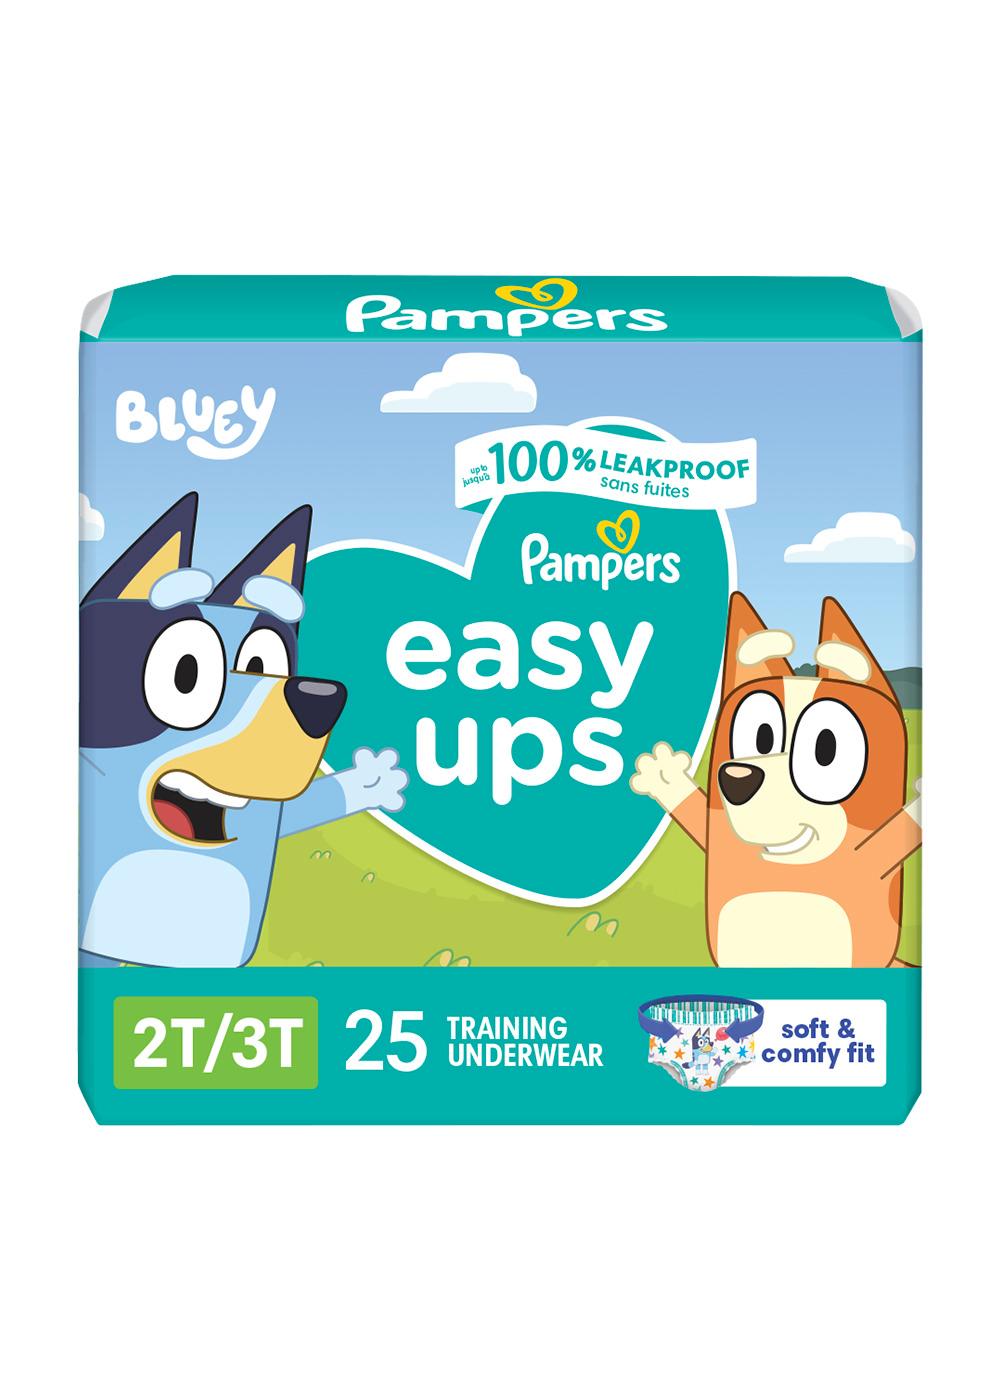 Pampers Easy Ups Training Underwear Boy Size 2T-3T; image 1 of 10